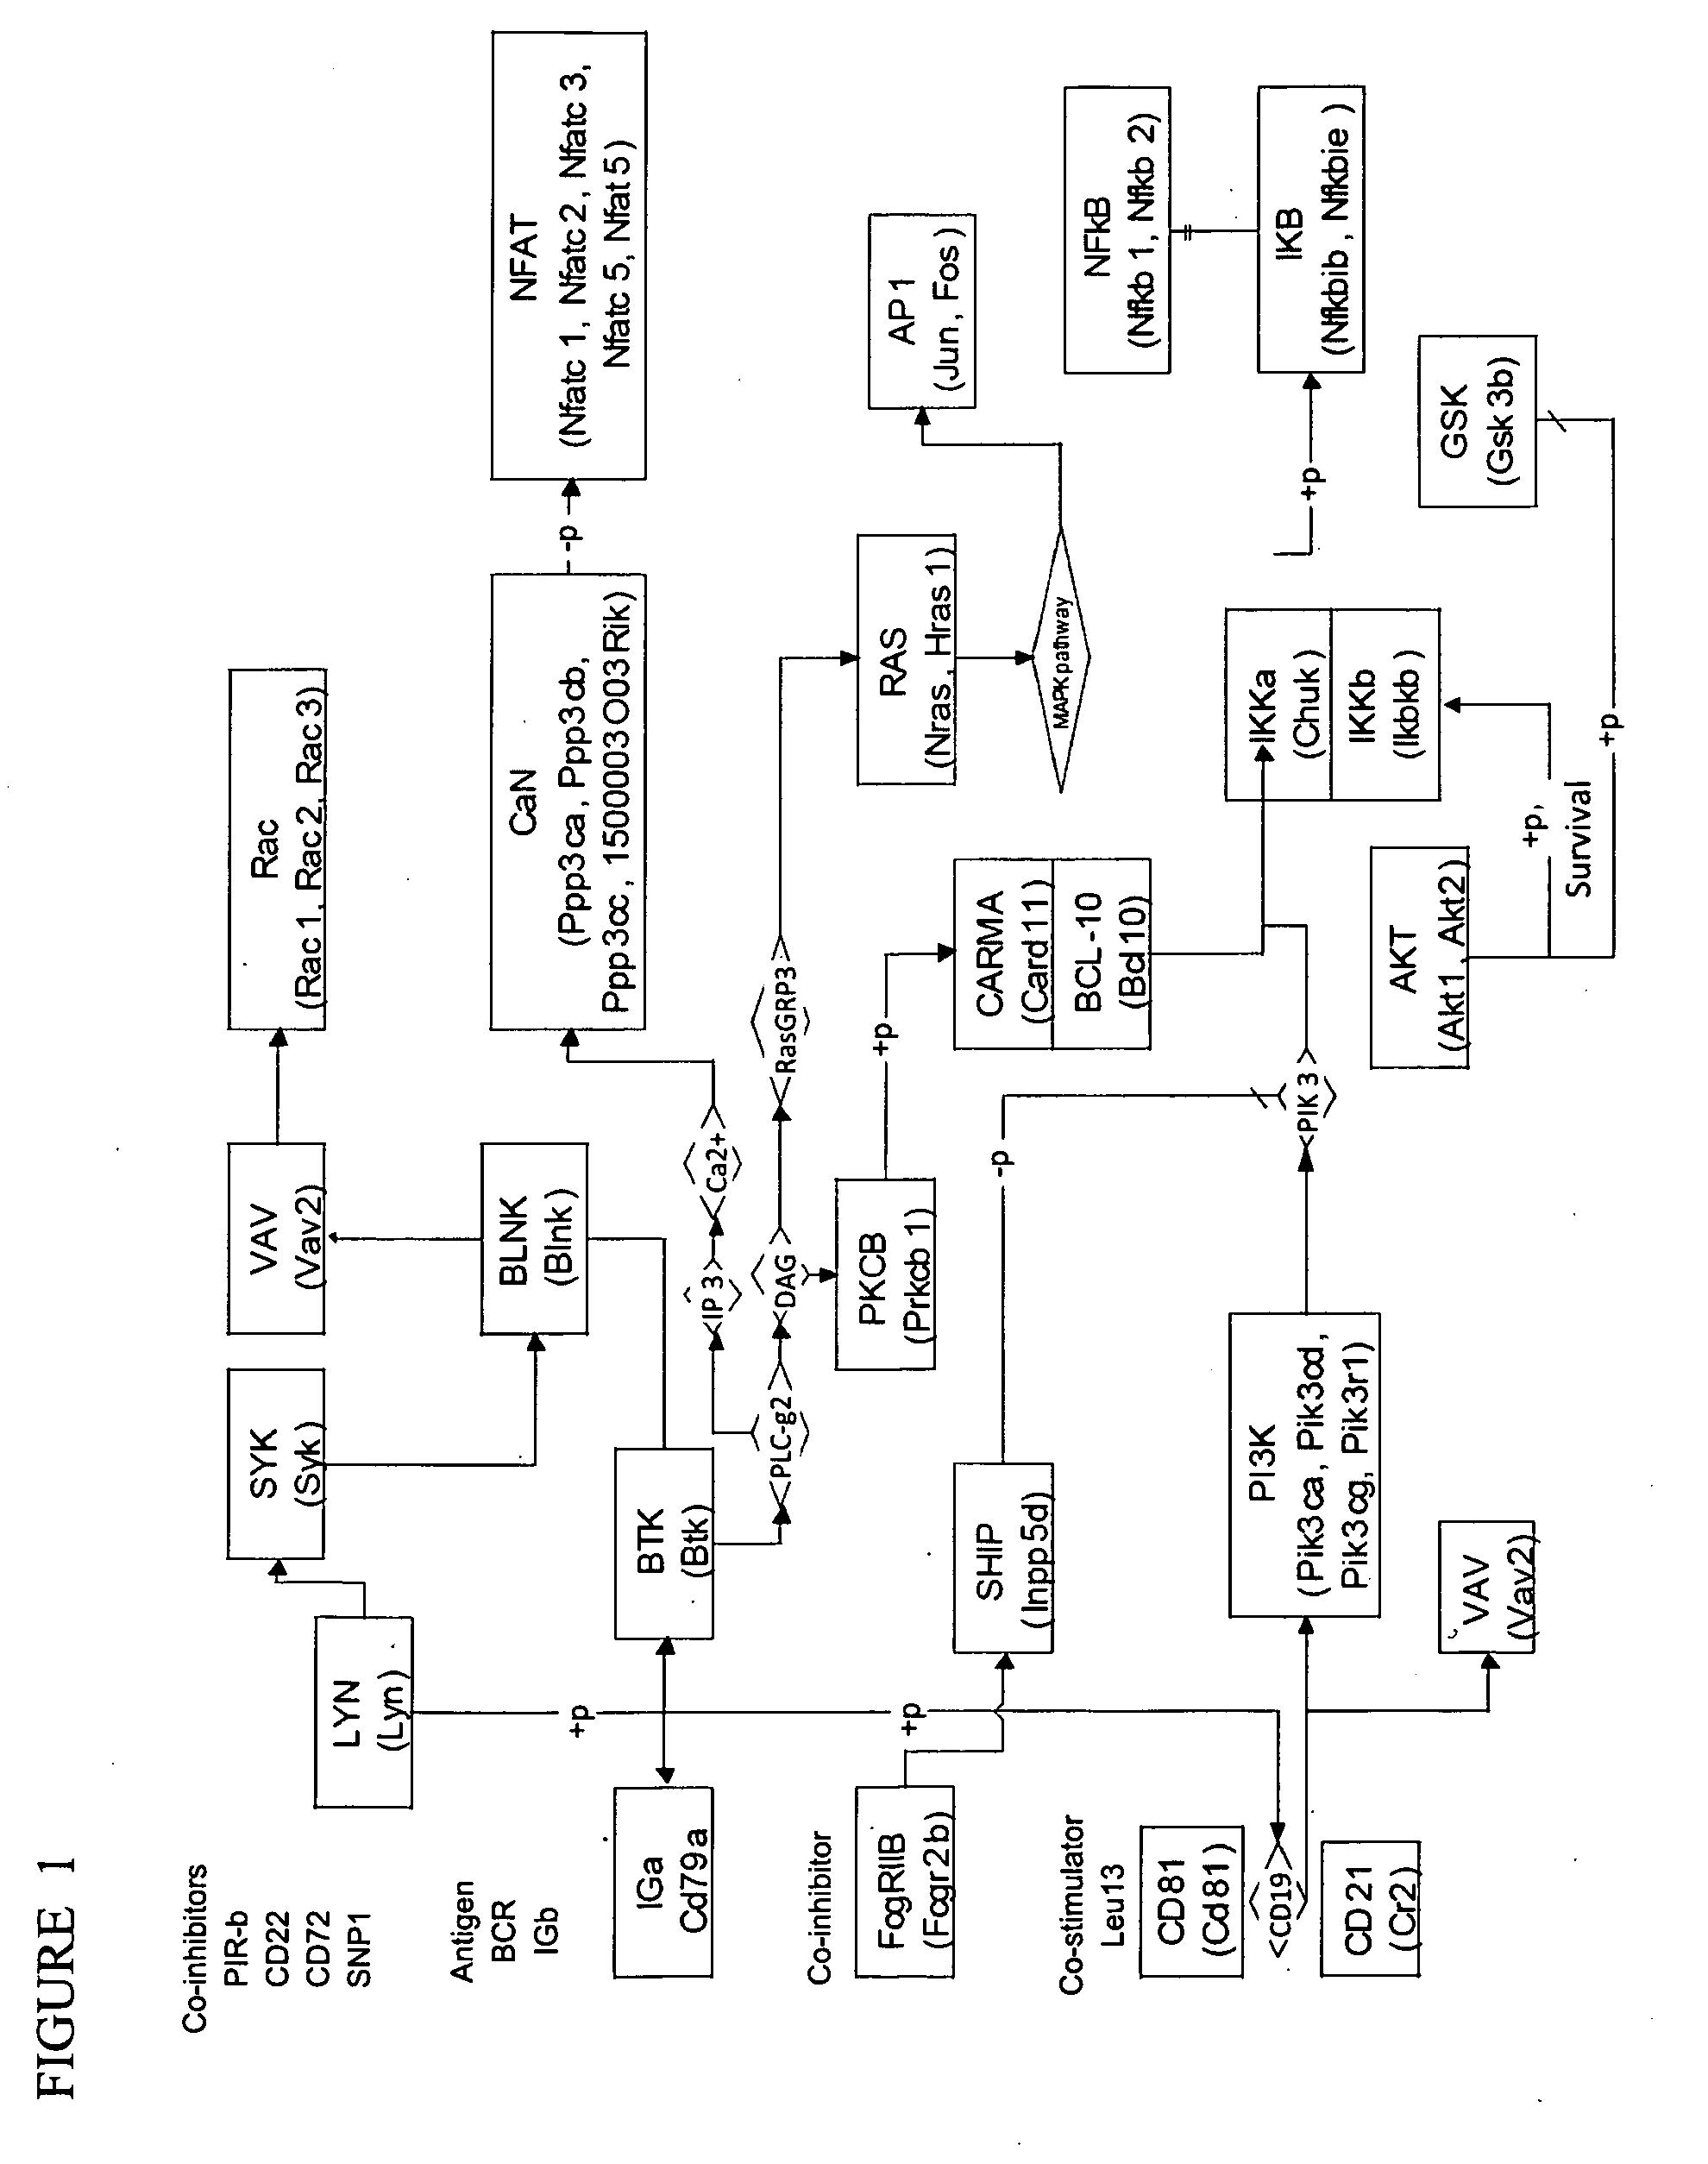 Methods and systems for identifying molecular pathway elements